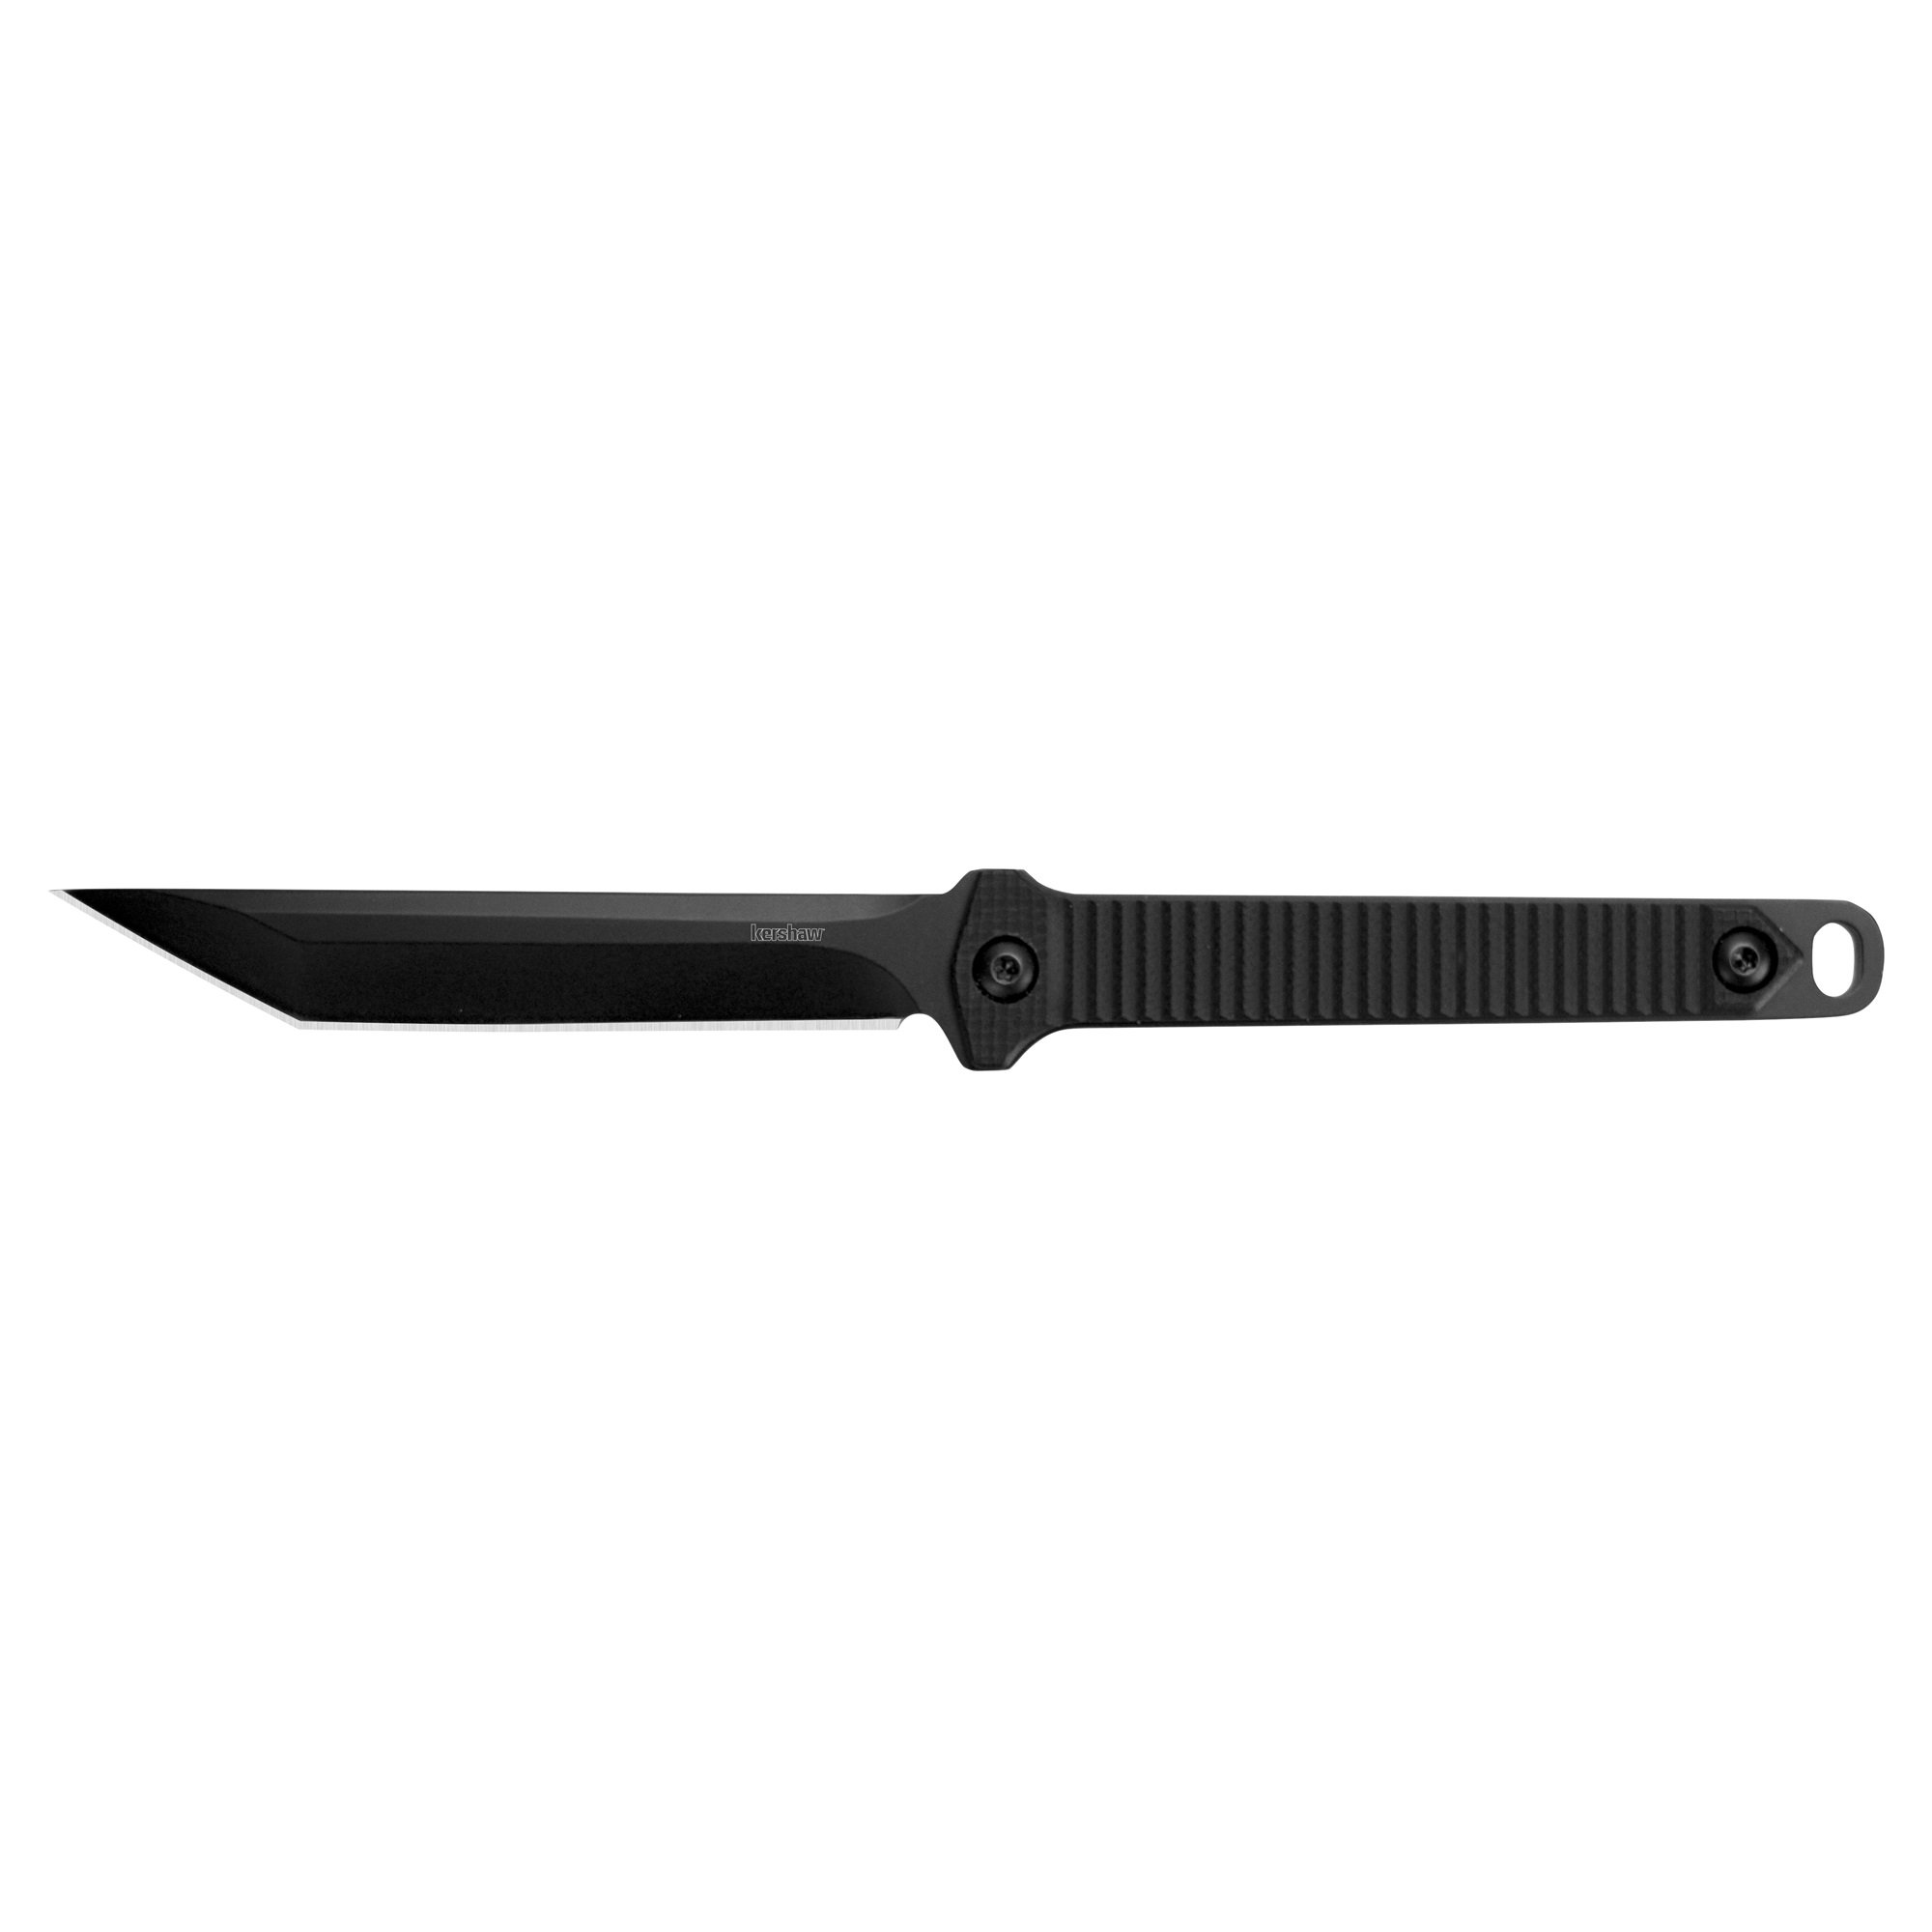 Kershaw Dune Full Tang Neck Knife (4008X) Compact 3.8” 3Cr13 Stainless Steel Fixed Blade With Black-Oxide Finish, Textured Injection Molded Handle, Secure Molded Sheath and Lanyard, 2.5 oz.